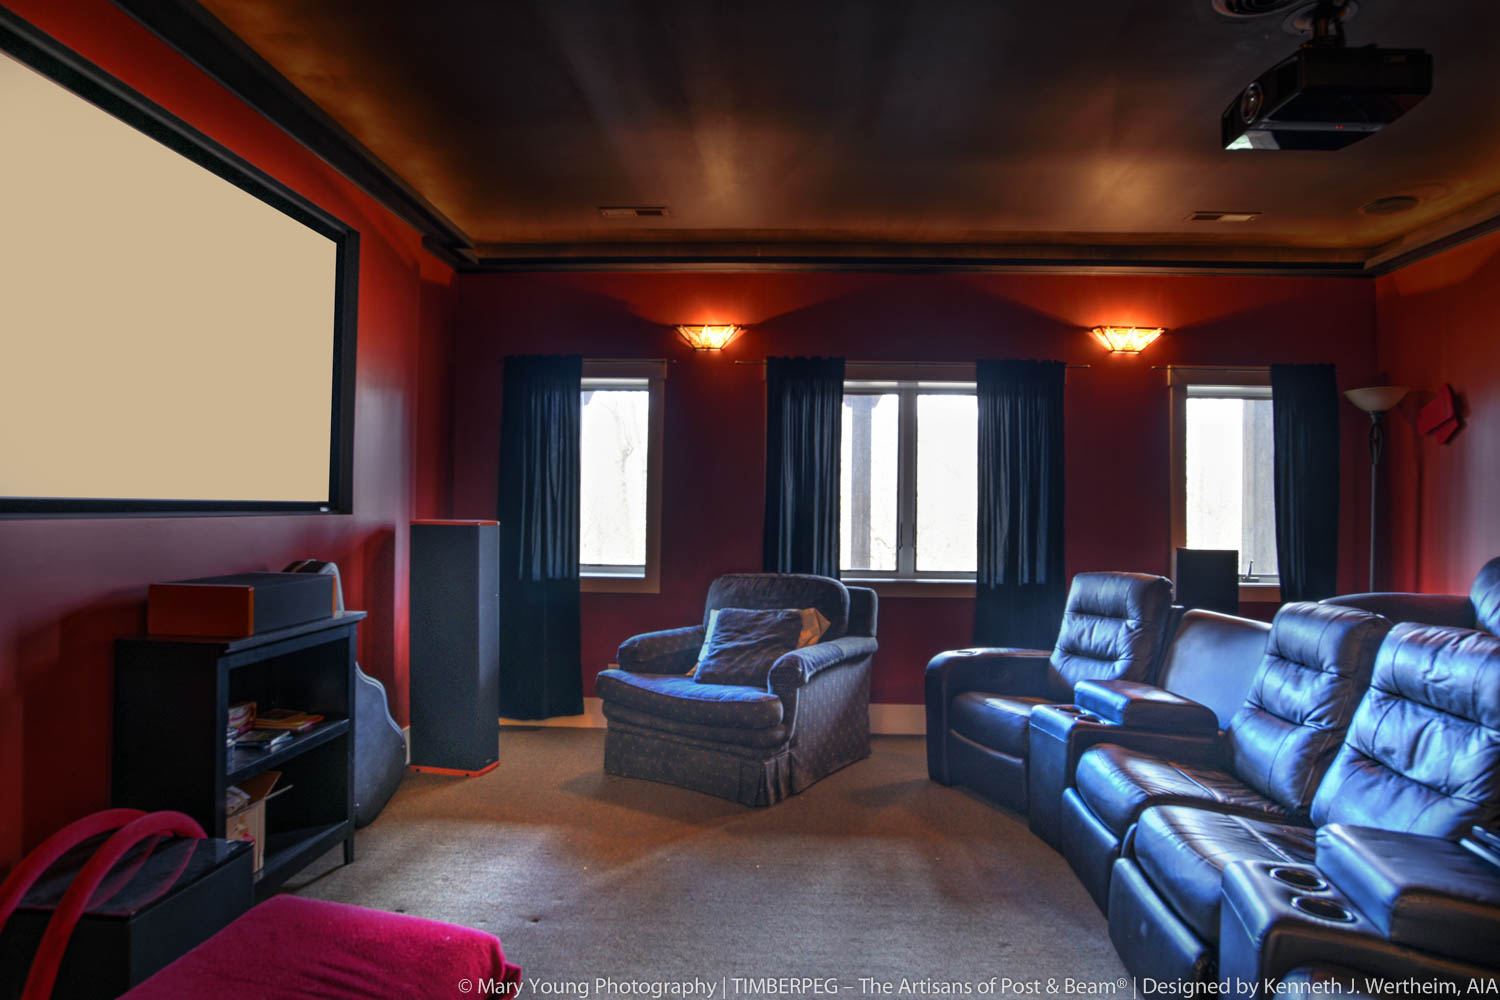 Fairview Cottage NC (5863) home theater featuring leather chairs, dark red walls, and dark curtains